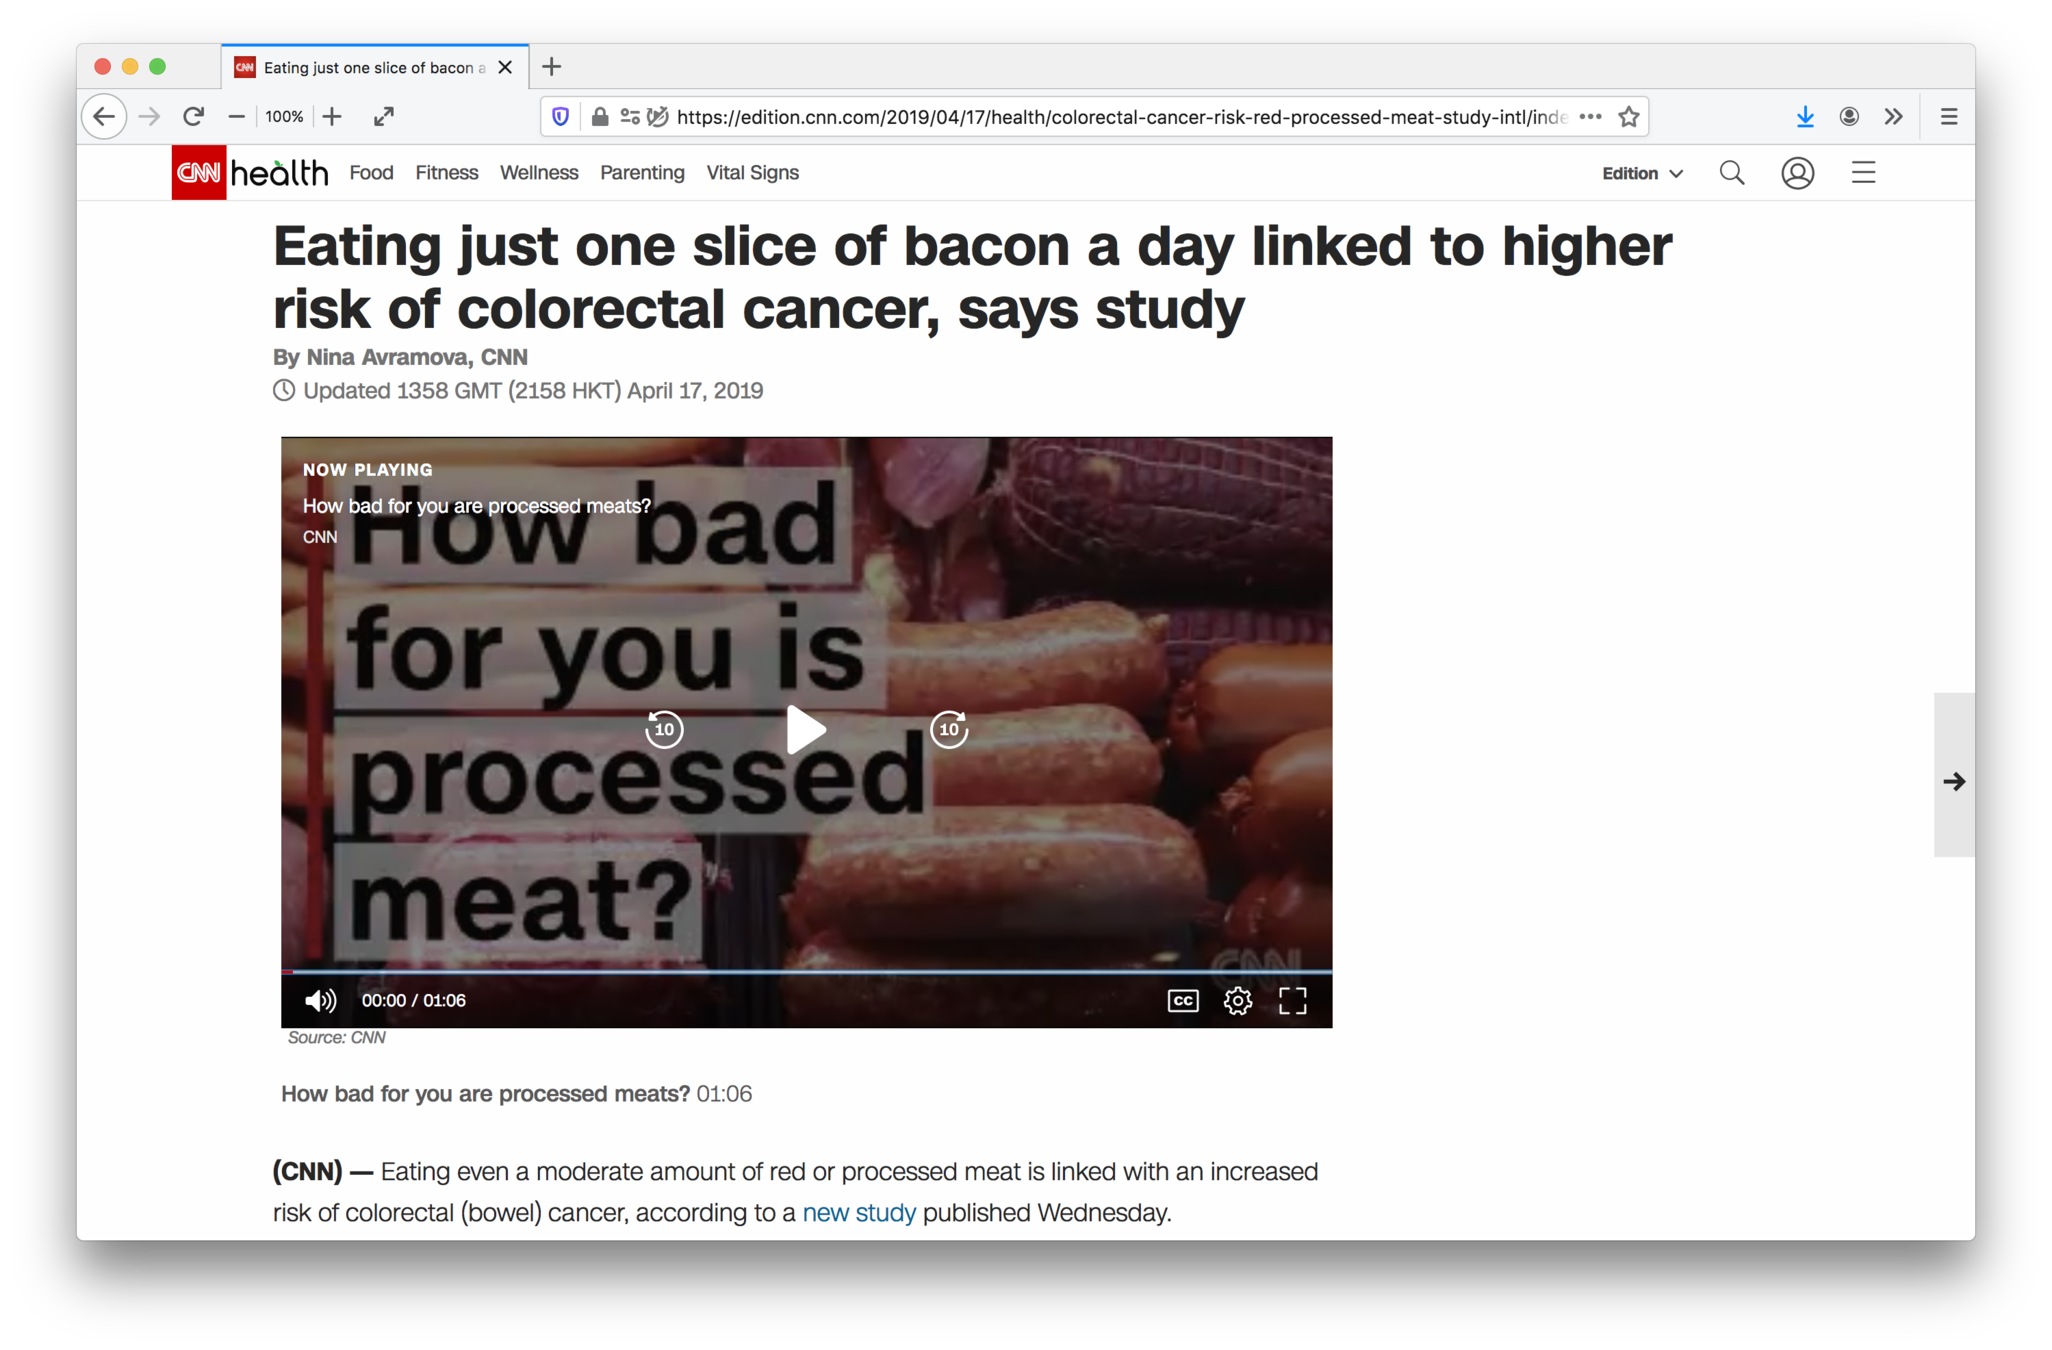 Screenshot of a web browser showing an article on cnn.com titled 'Eating just one slice of bacon a day linked to higher risk of colorectal cancer, says study'